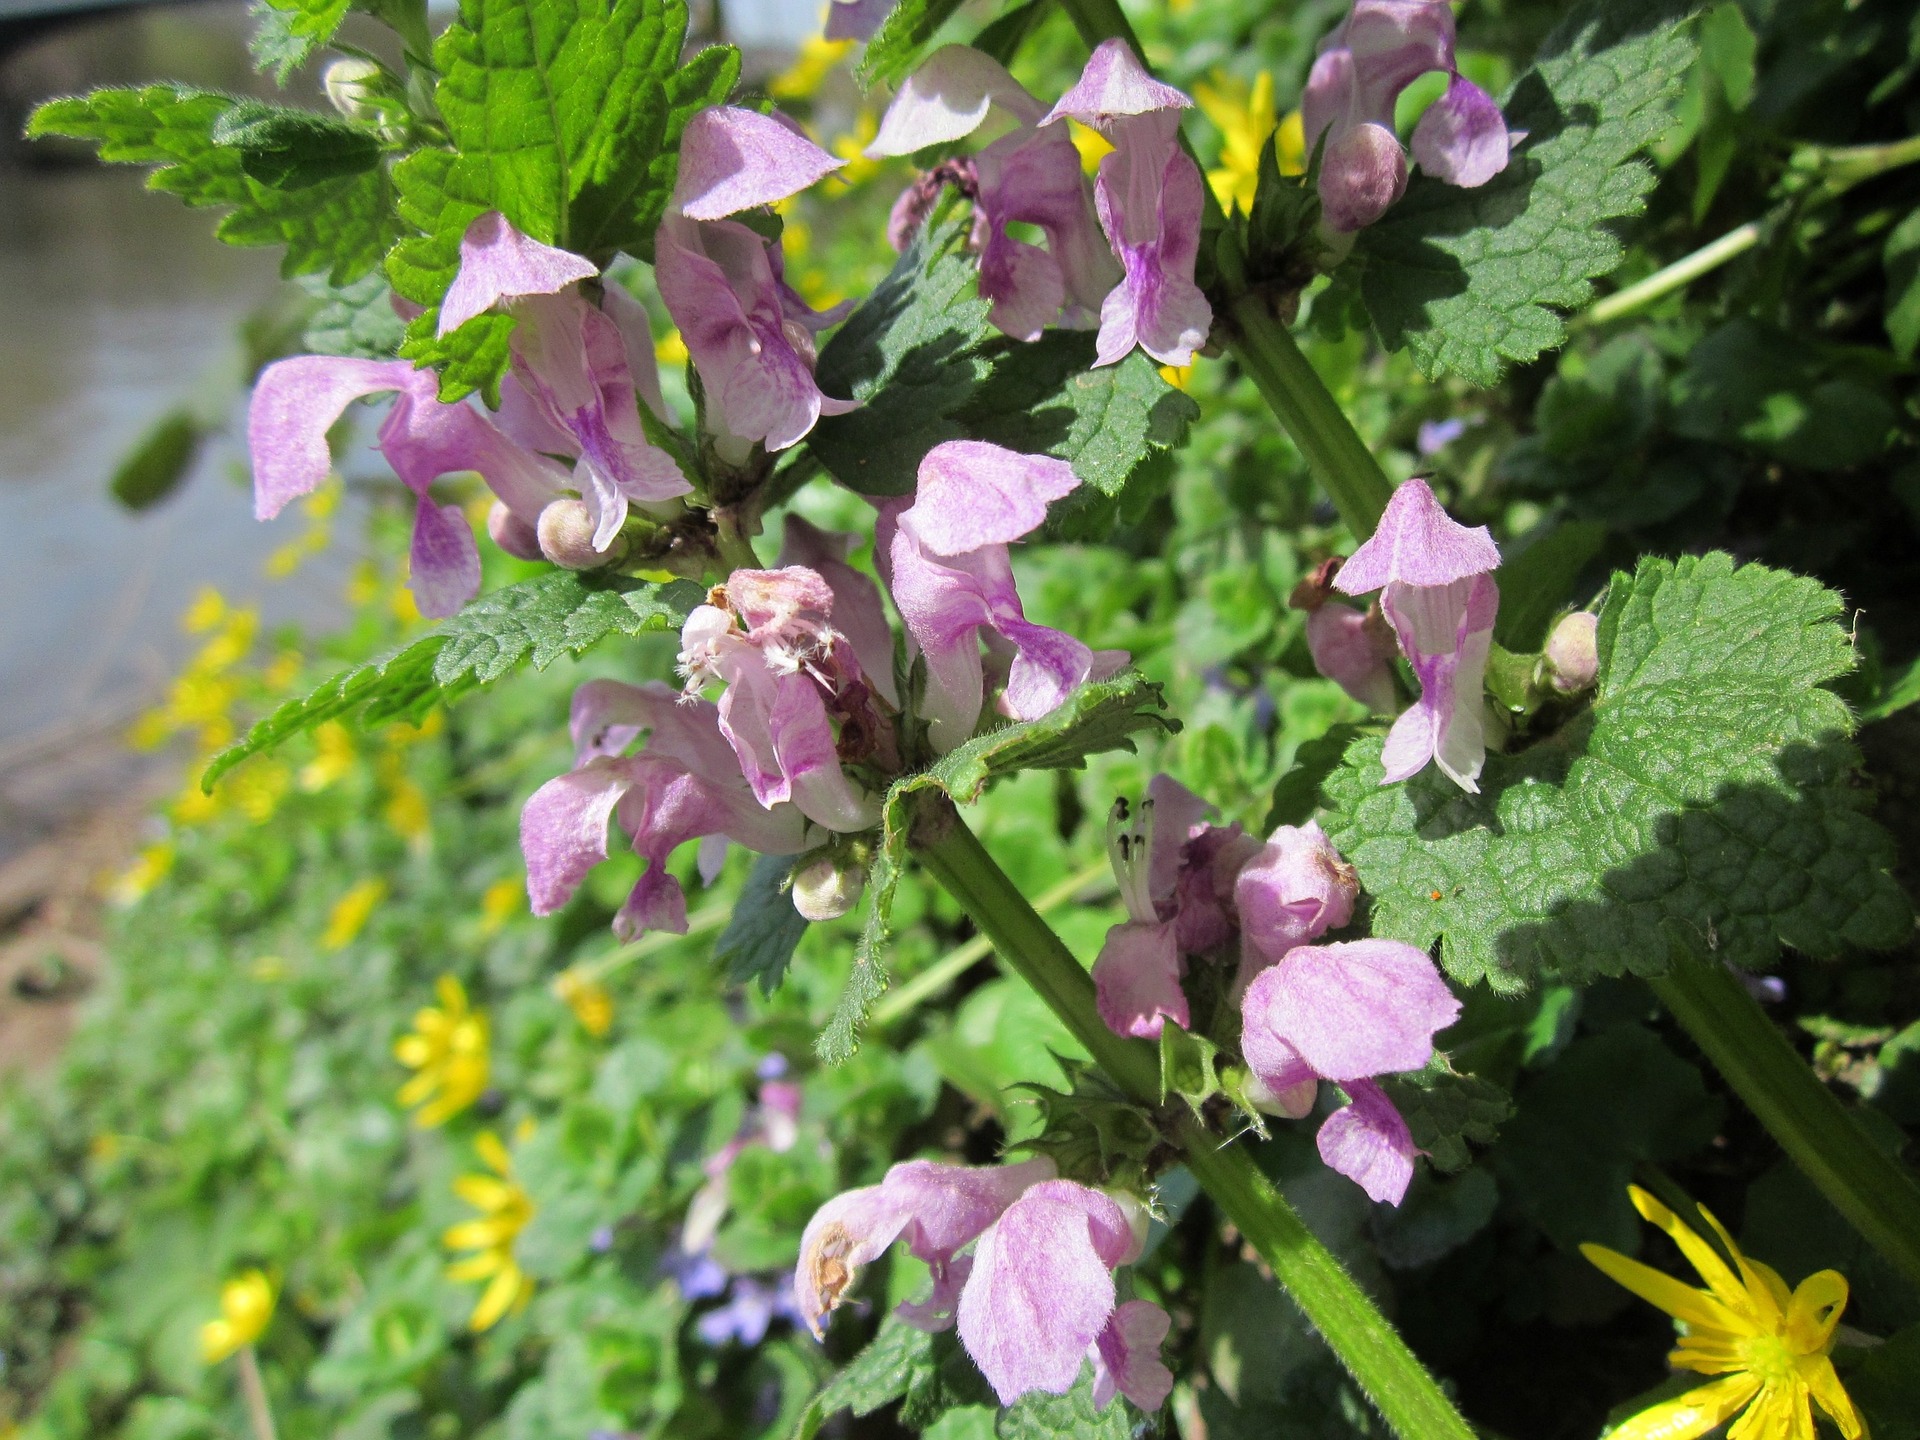 Henbit is a common Texas weed with flowers